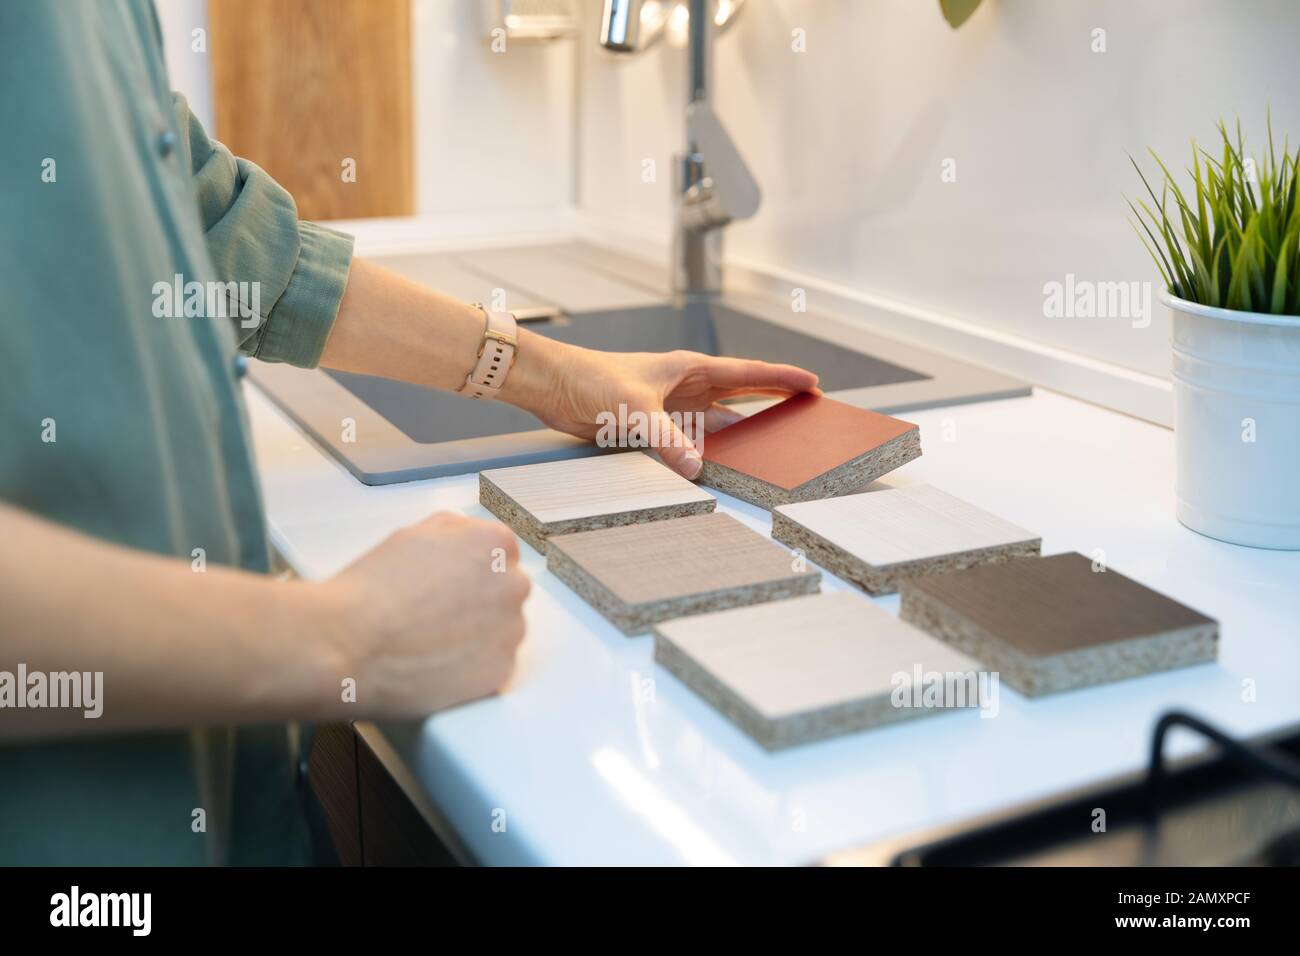 woman choosing kitchen countertop material texture from samples Stock Photo